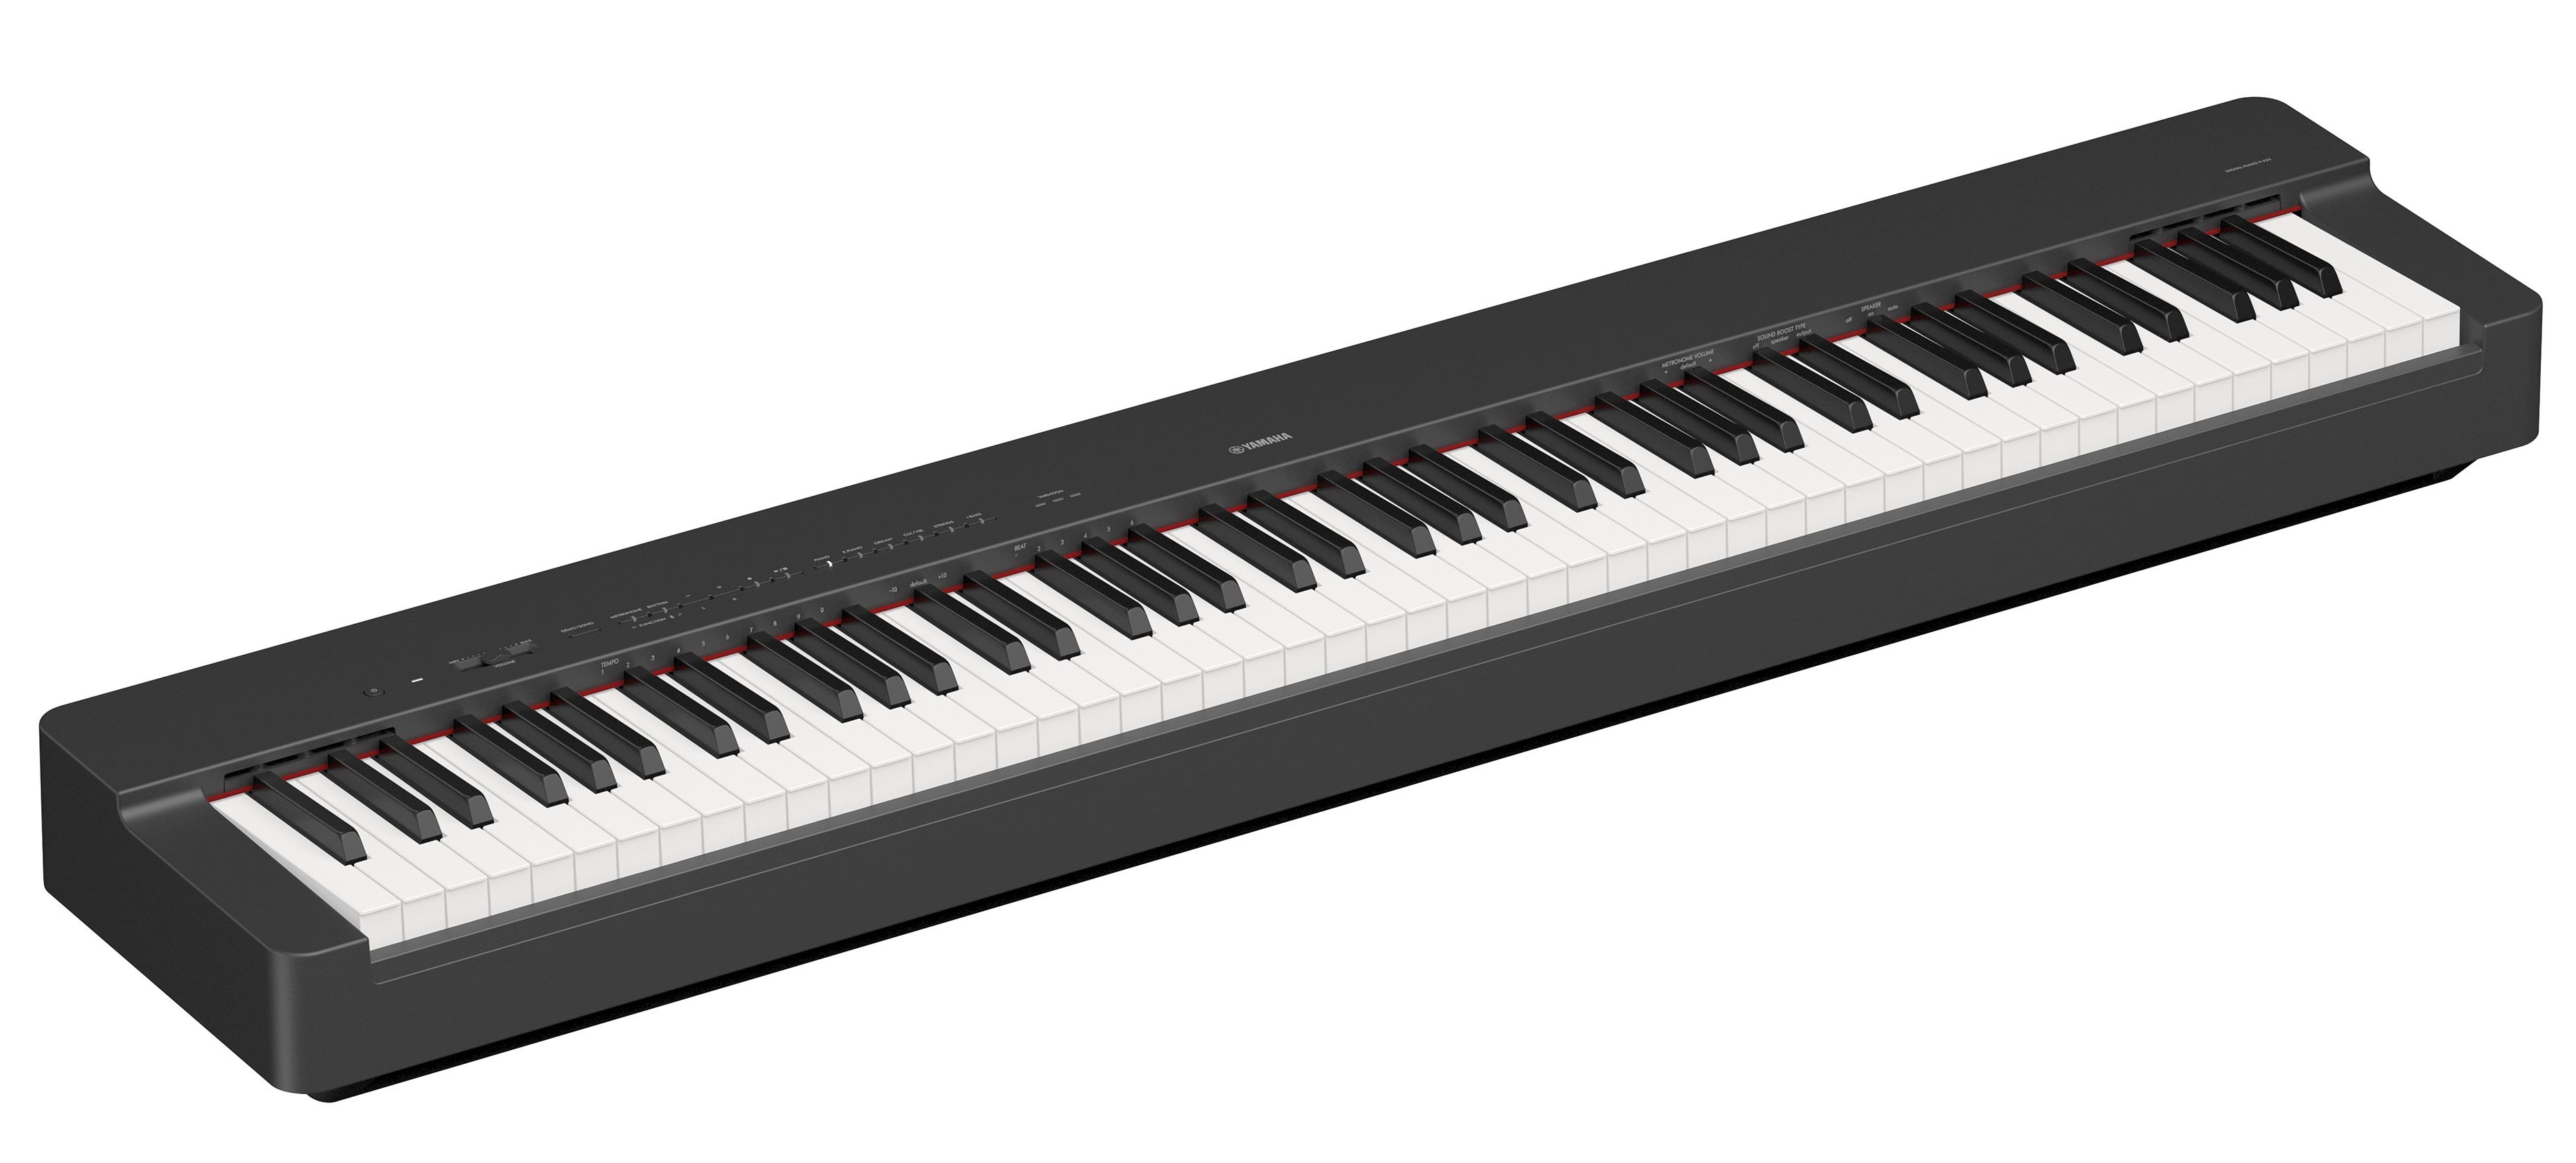 P-225 B Stagepiano